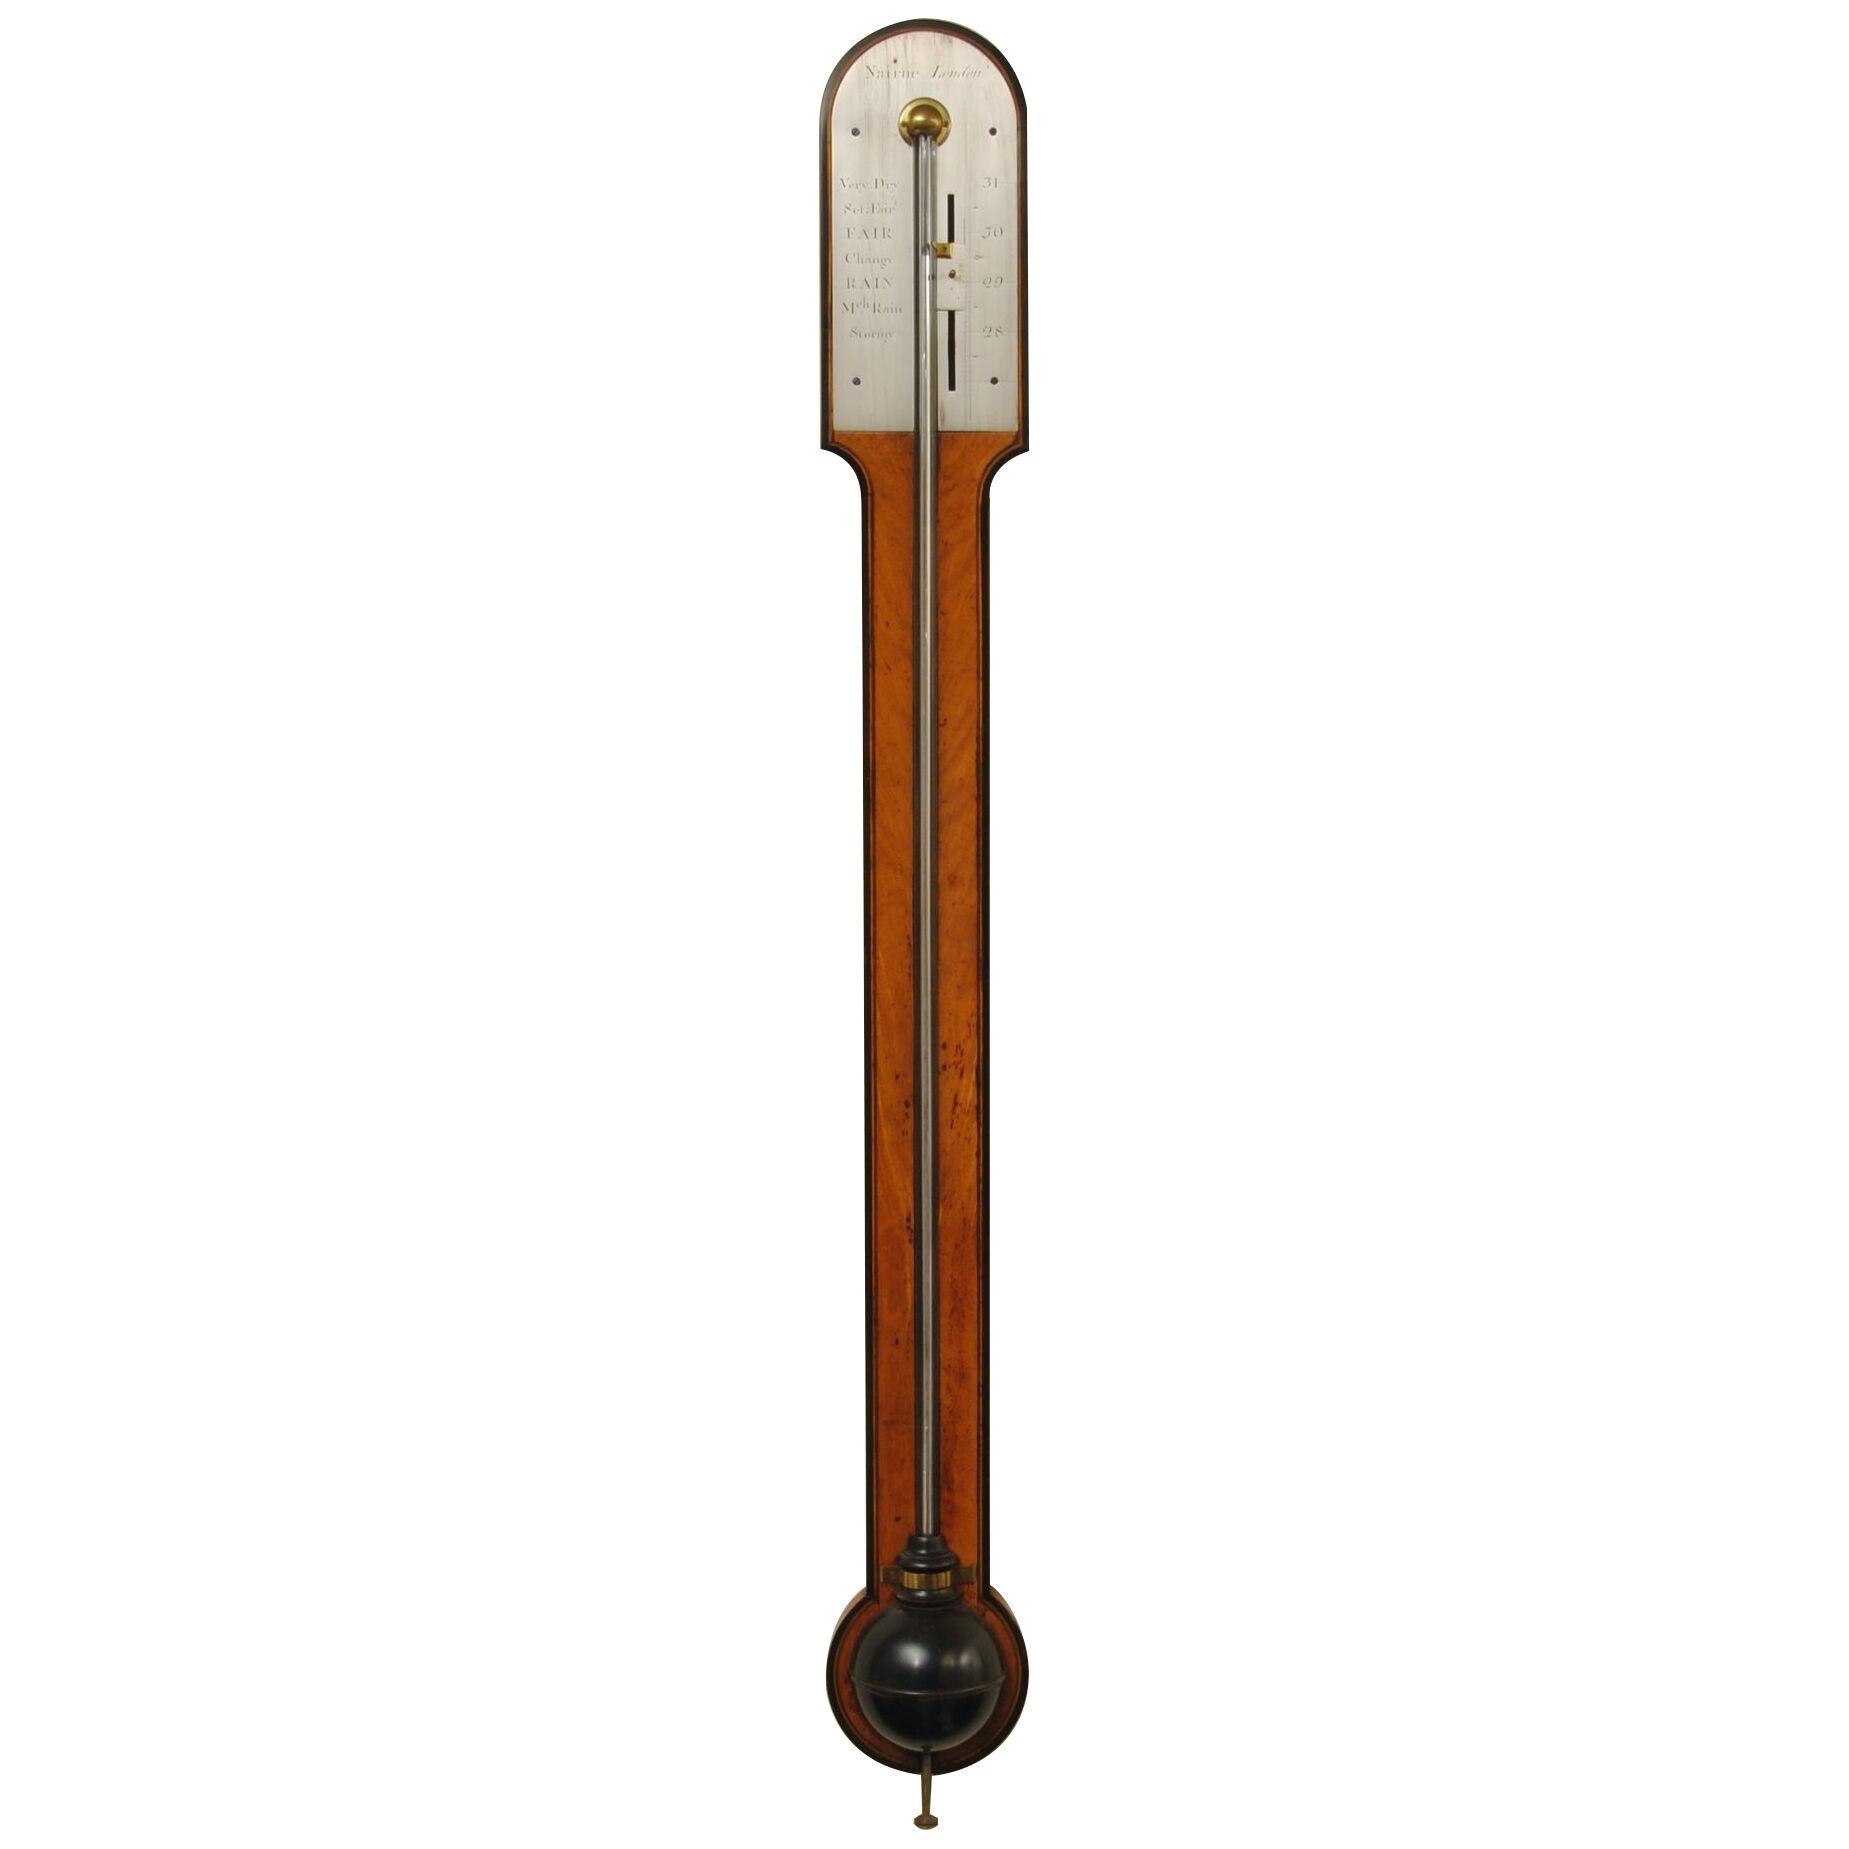 AN 18TH CENTURY STICK BAROMETER BY NAIRNE LONDON